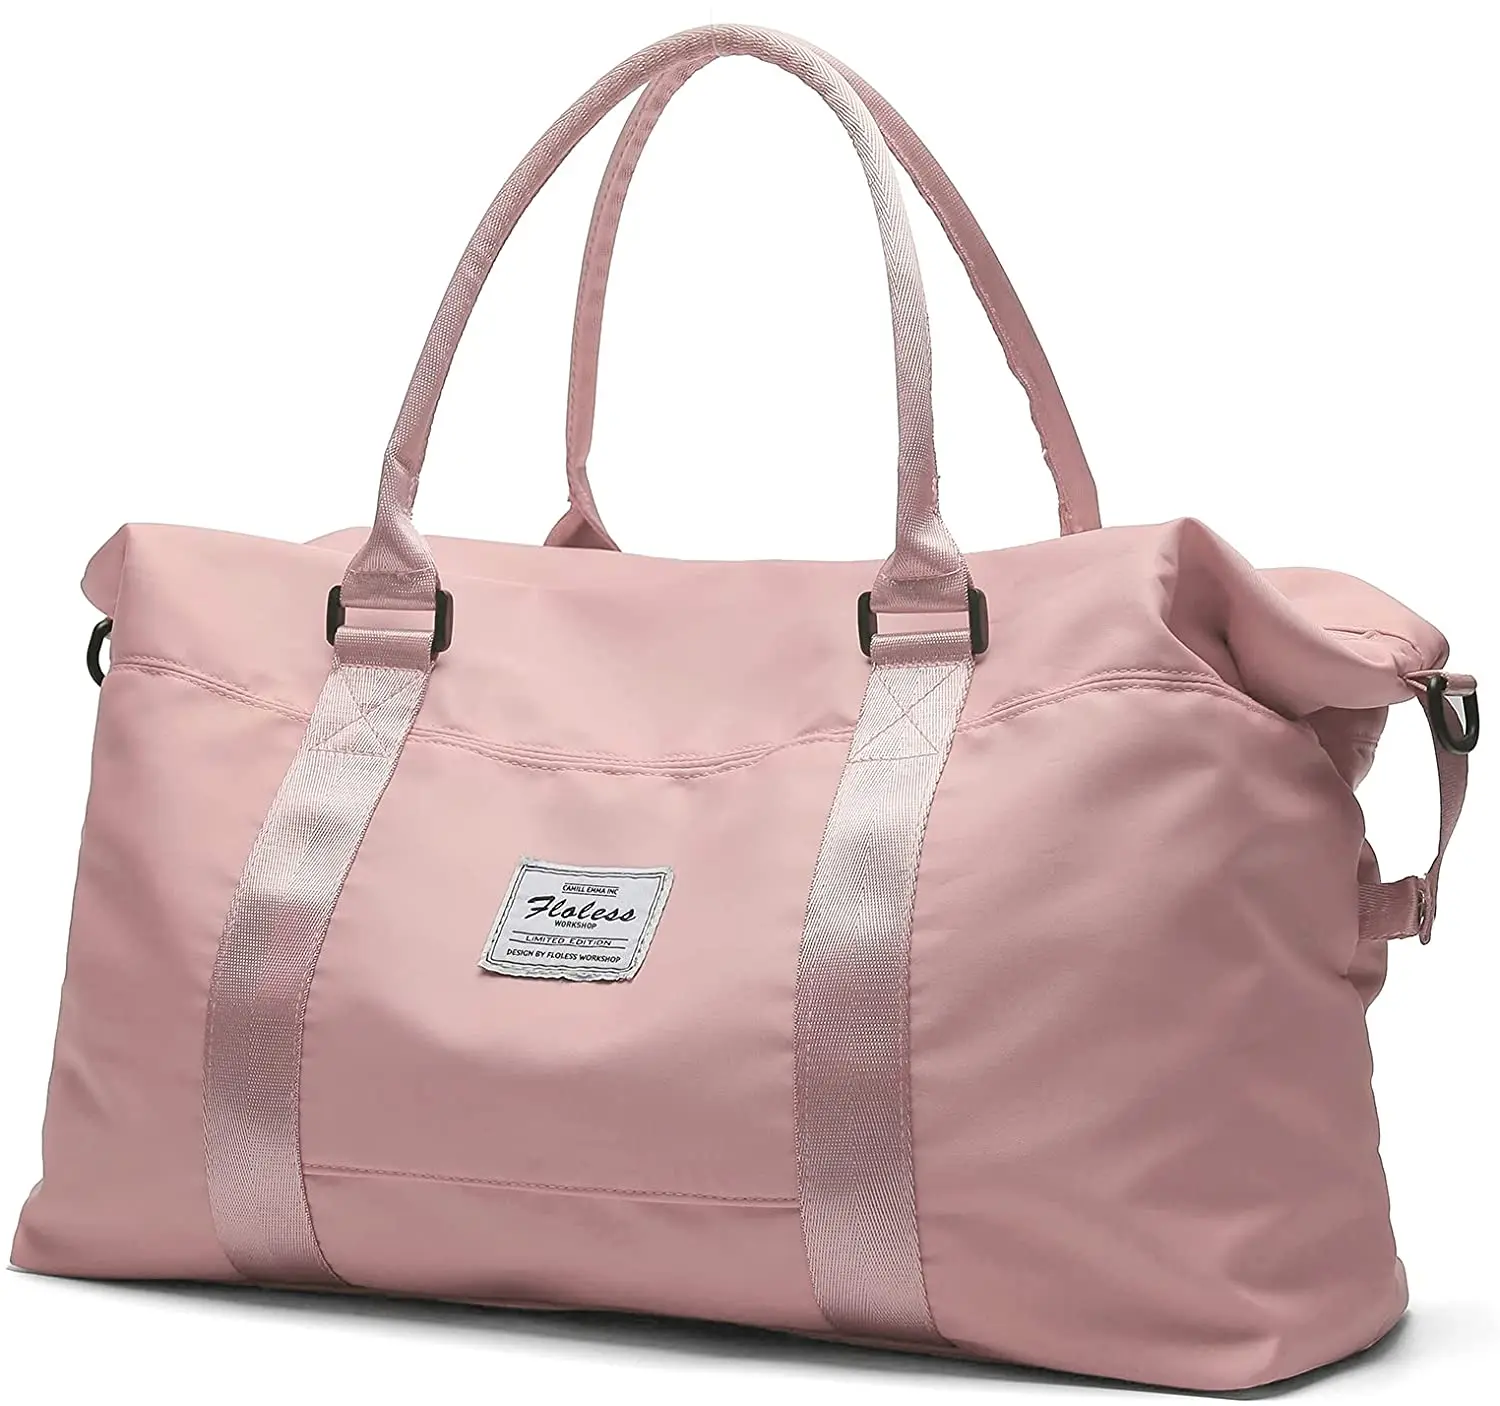 Best Gym Bags For Women - Fitness Totes, Sports Duffles